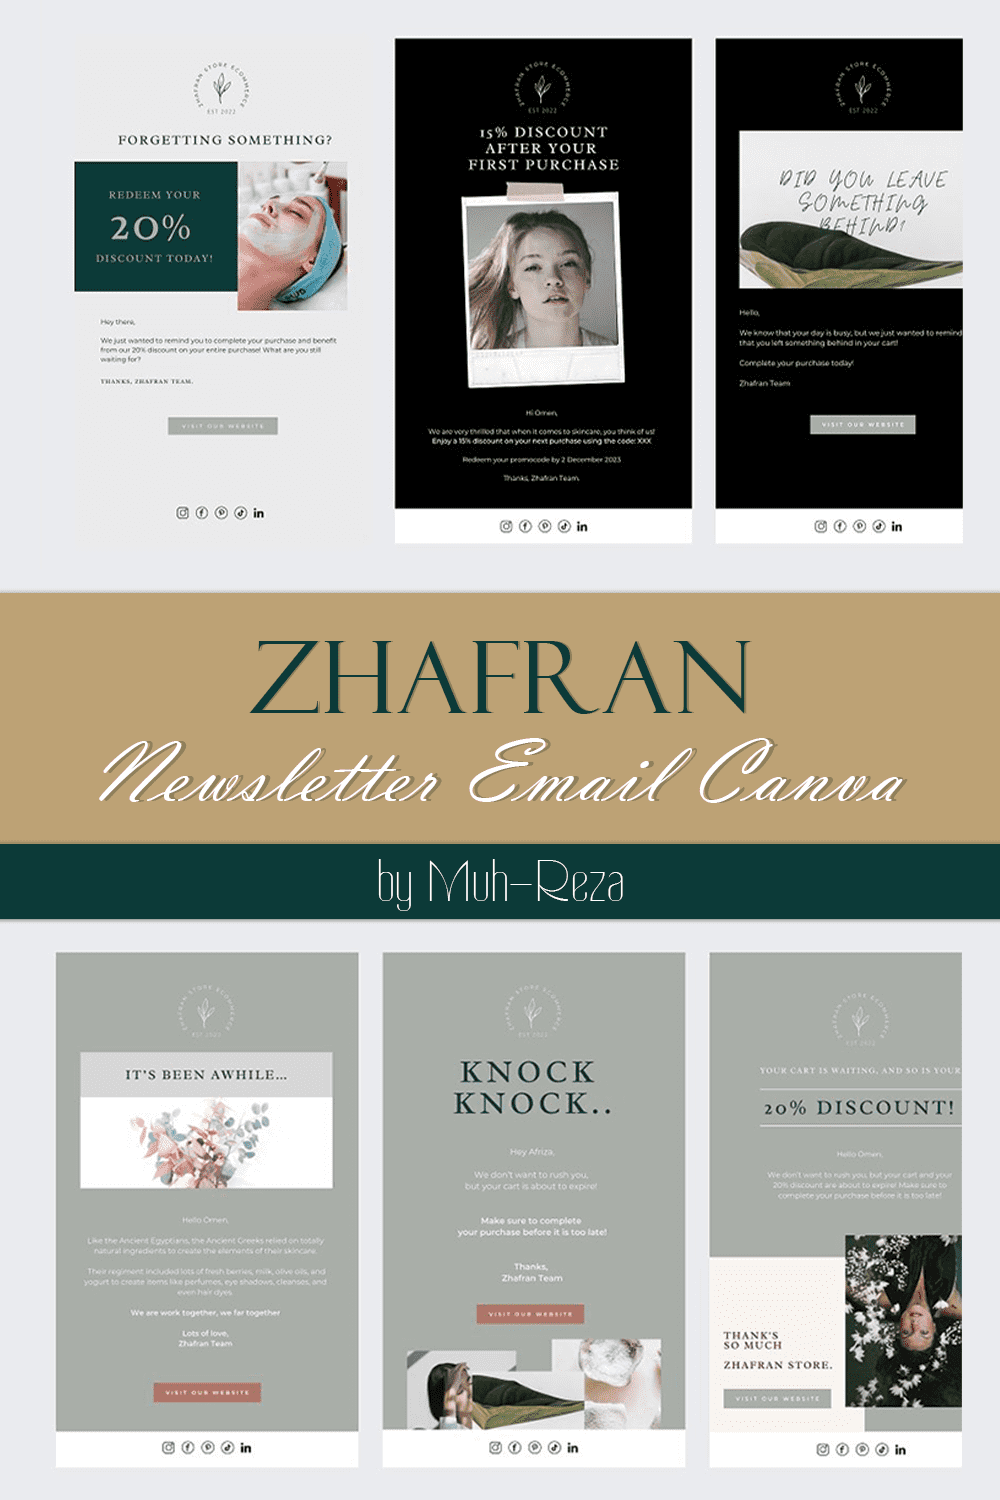 Image collection of unique email design templates for beauty salons.